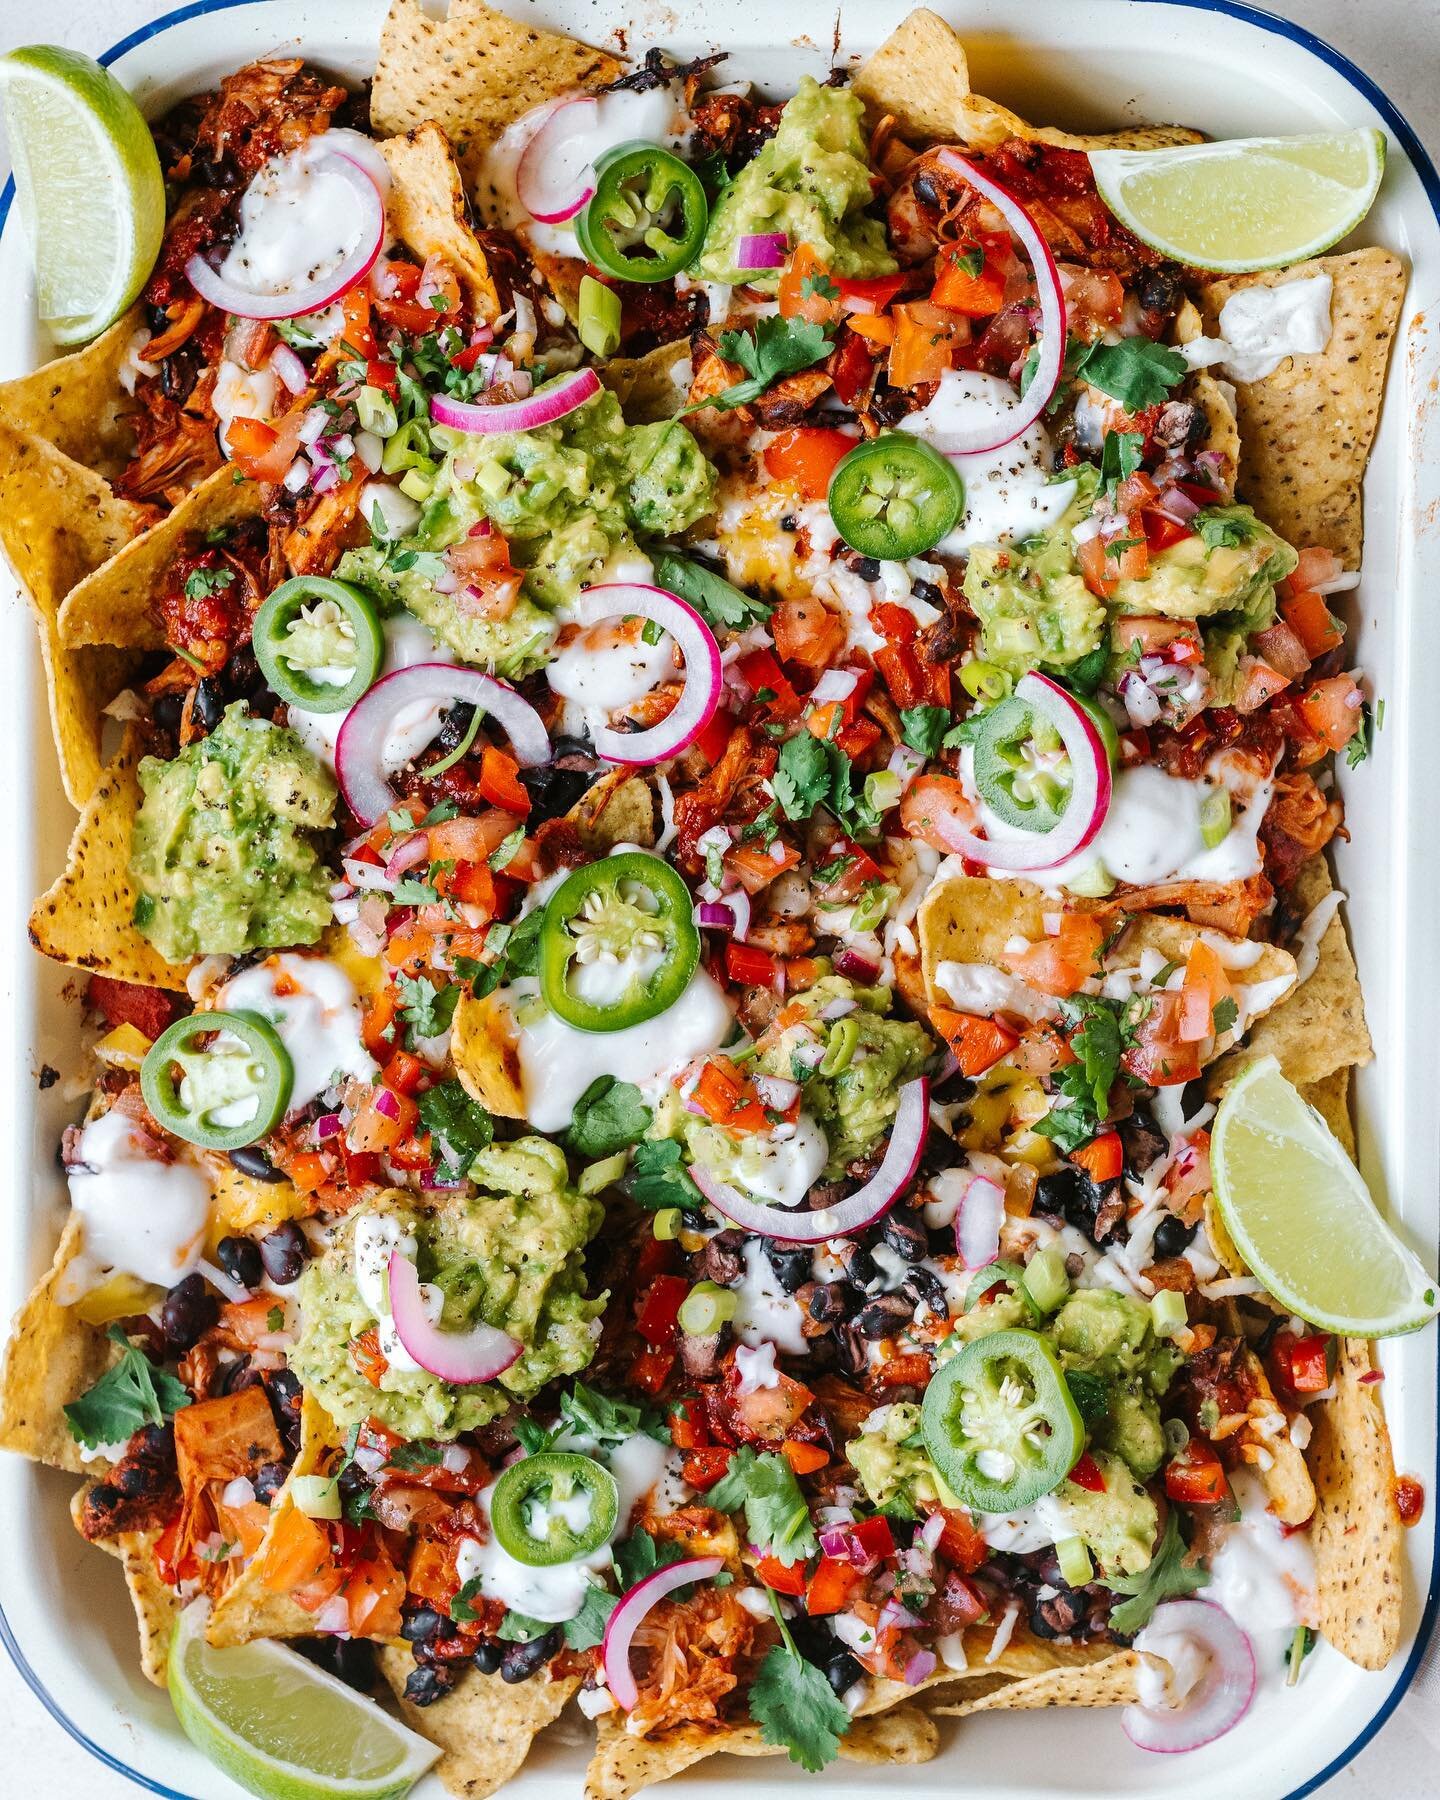 NEW RECIPE 🥑 tray bake vegan nachos! with chipotle jackfruit, fresh salsa and cheats sour cream. Designed for sharing with friends, full free recipe is on my blog, link in bio or head to:
www.elsaswholesomelife.com

#nachos #veganrecipes #veganfood 